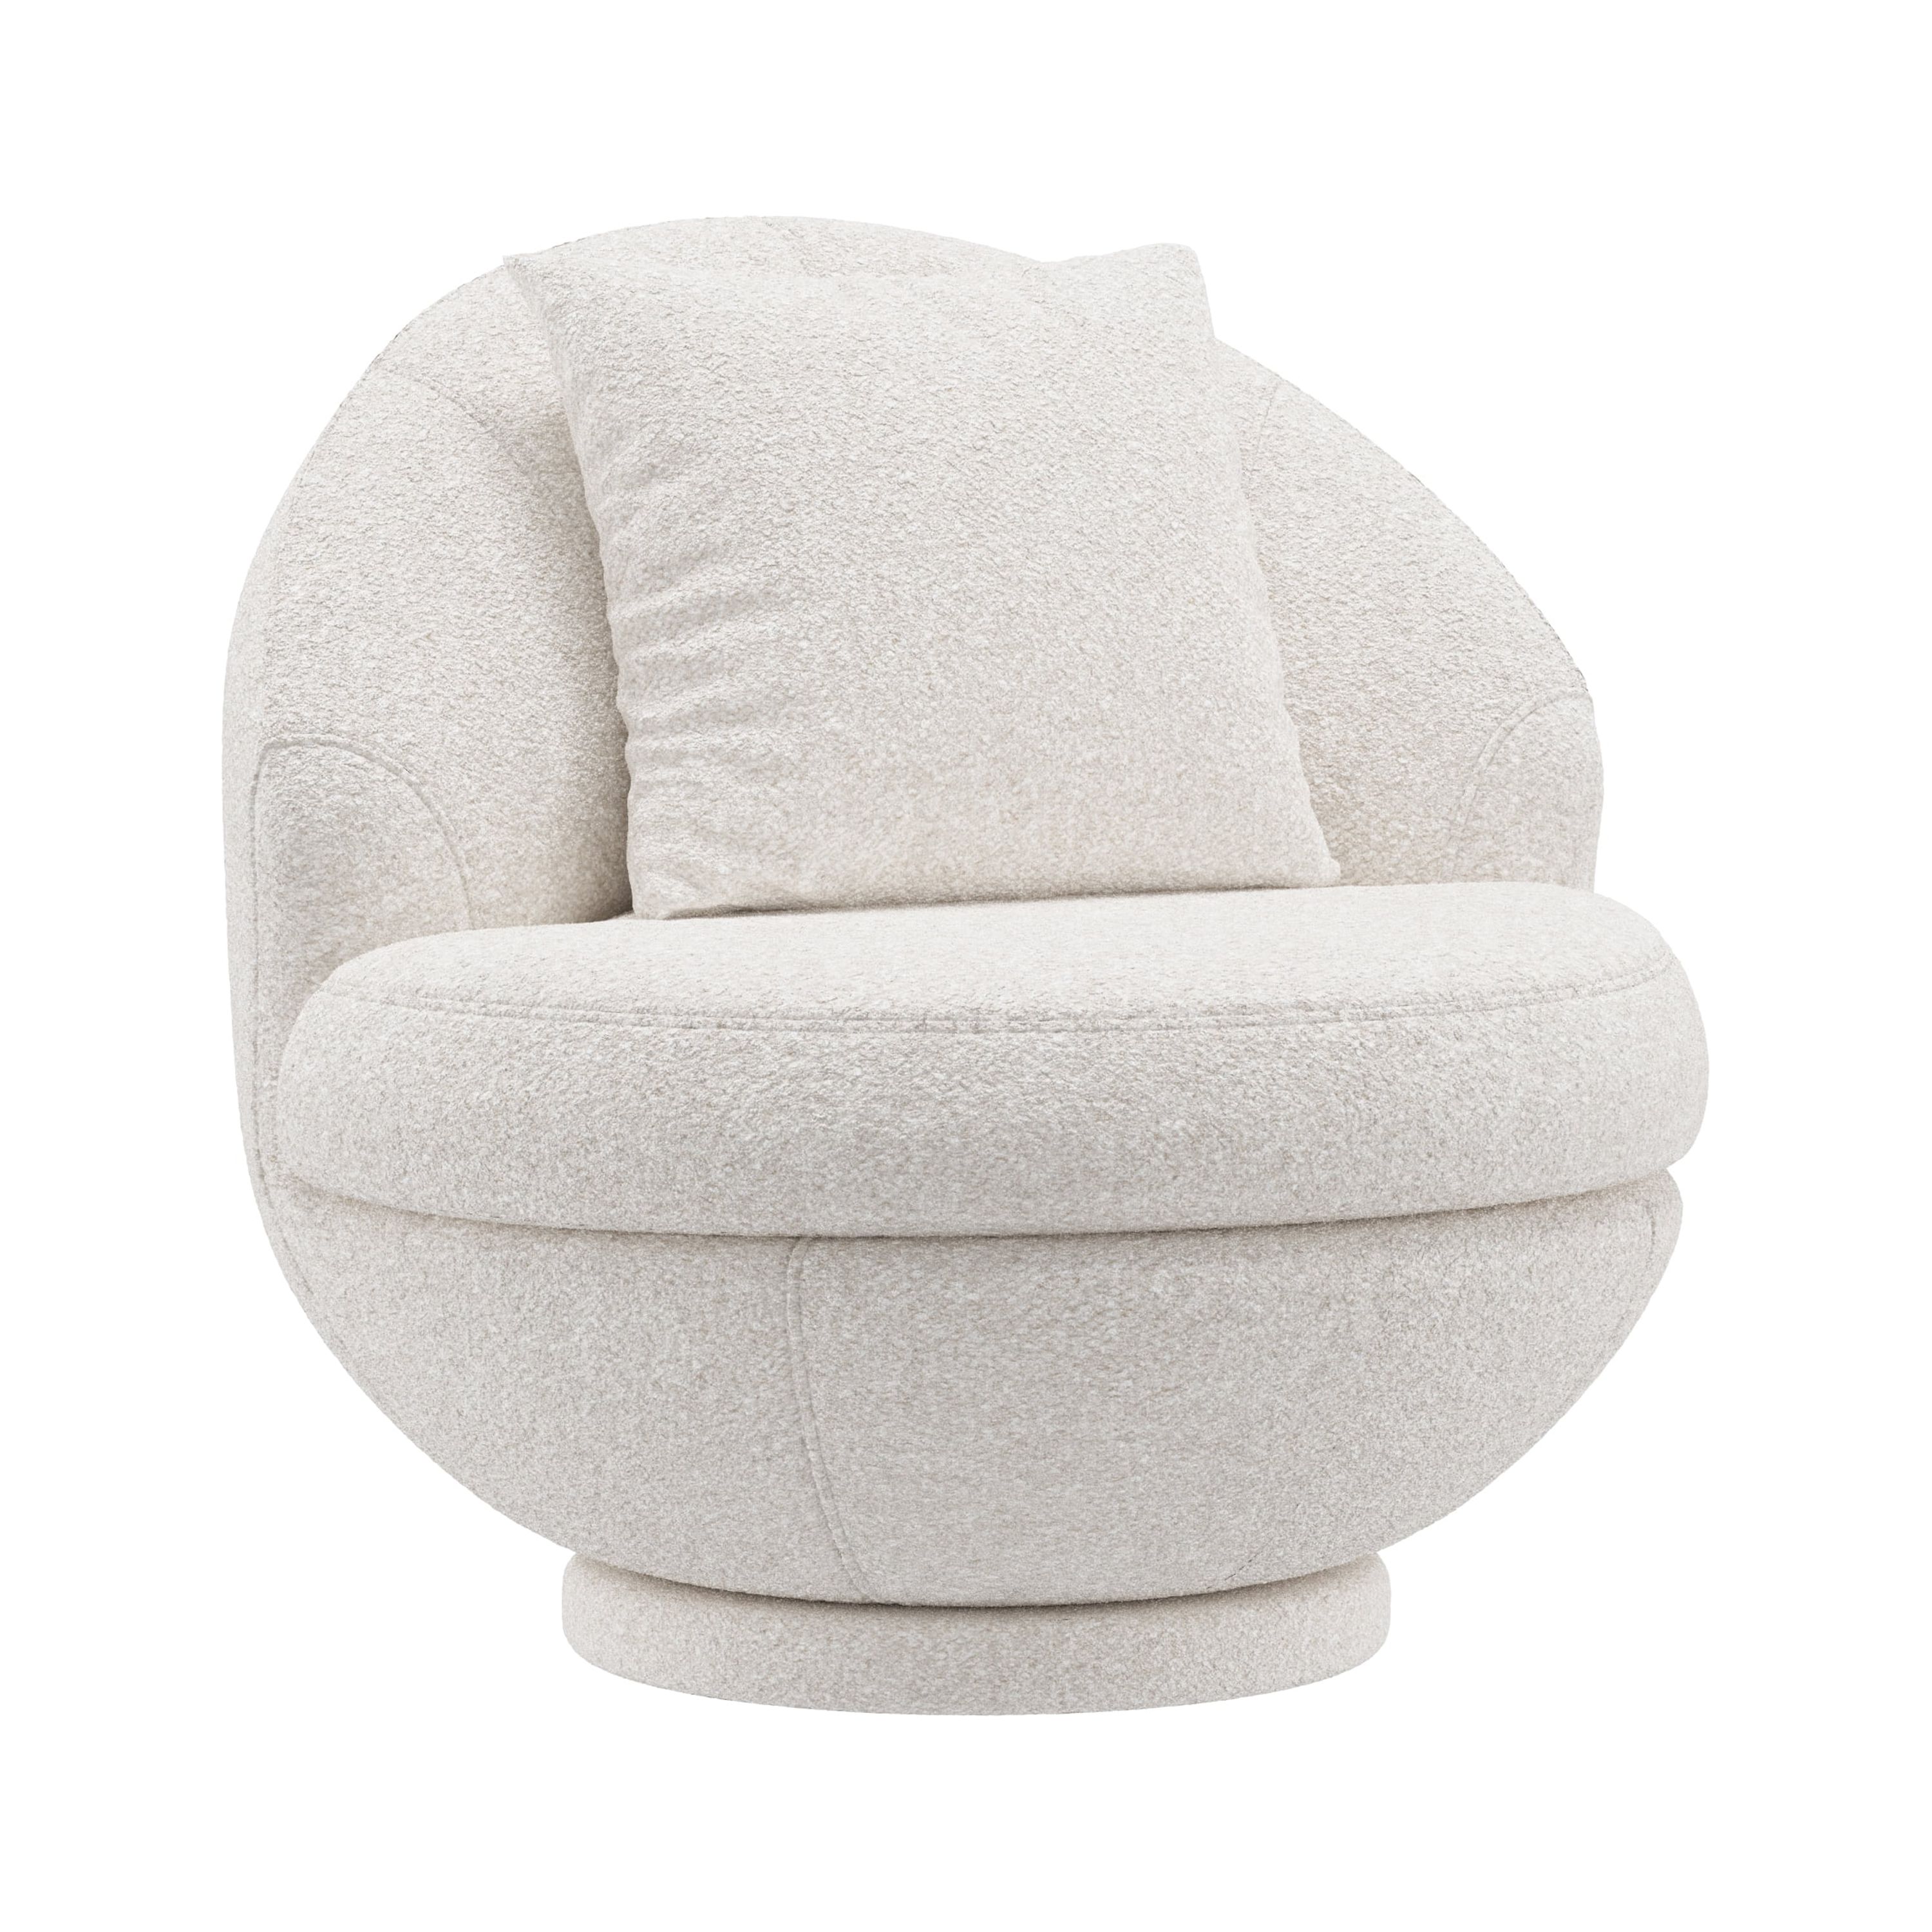 Hillsdale Boulder Upholstered Swivel Storage Chair, Ash White - image 1 of 22